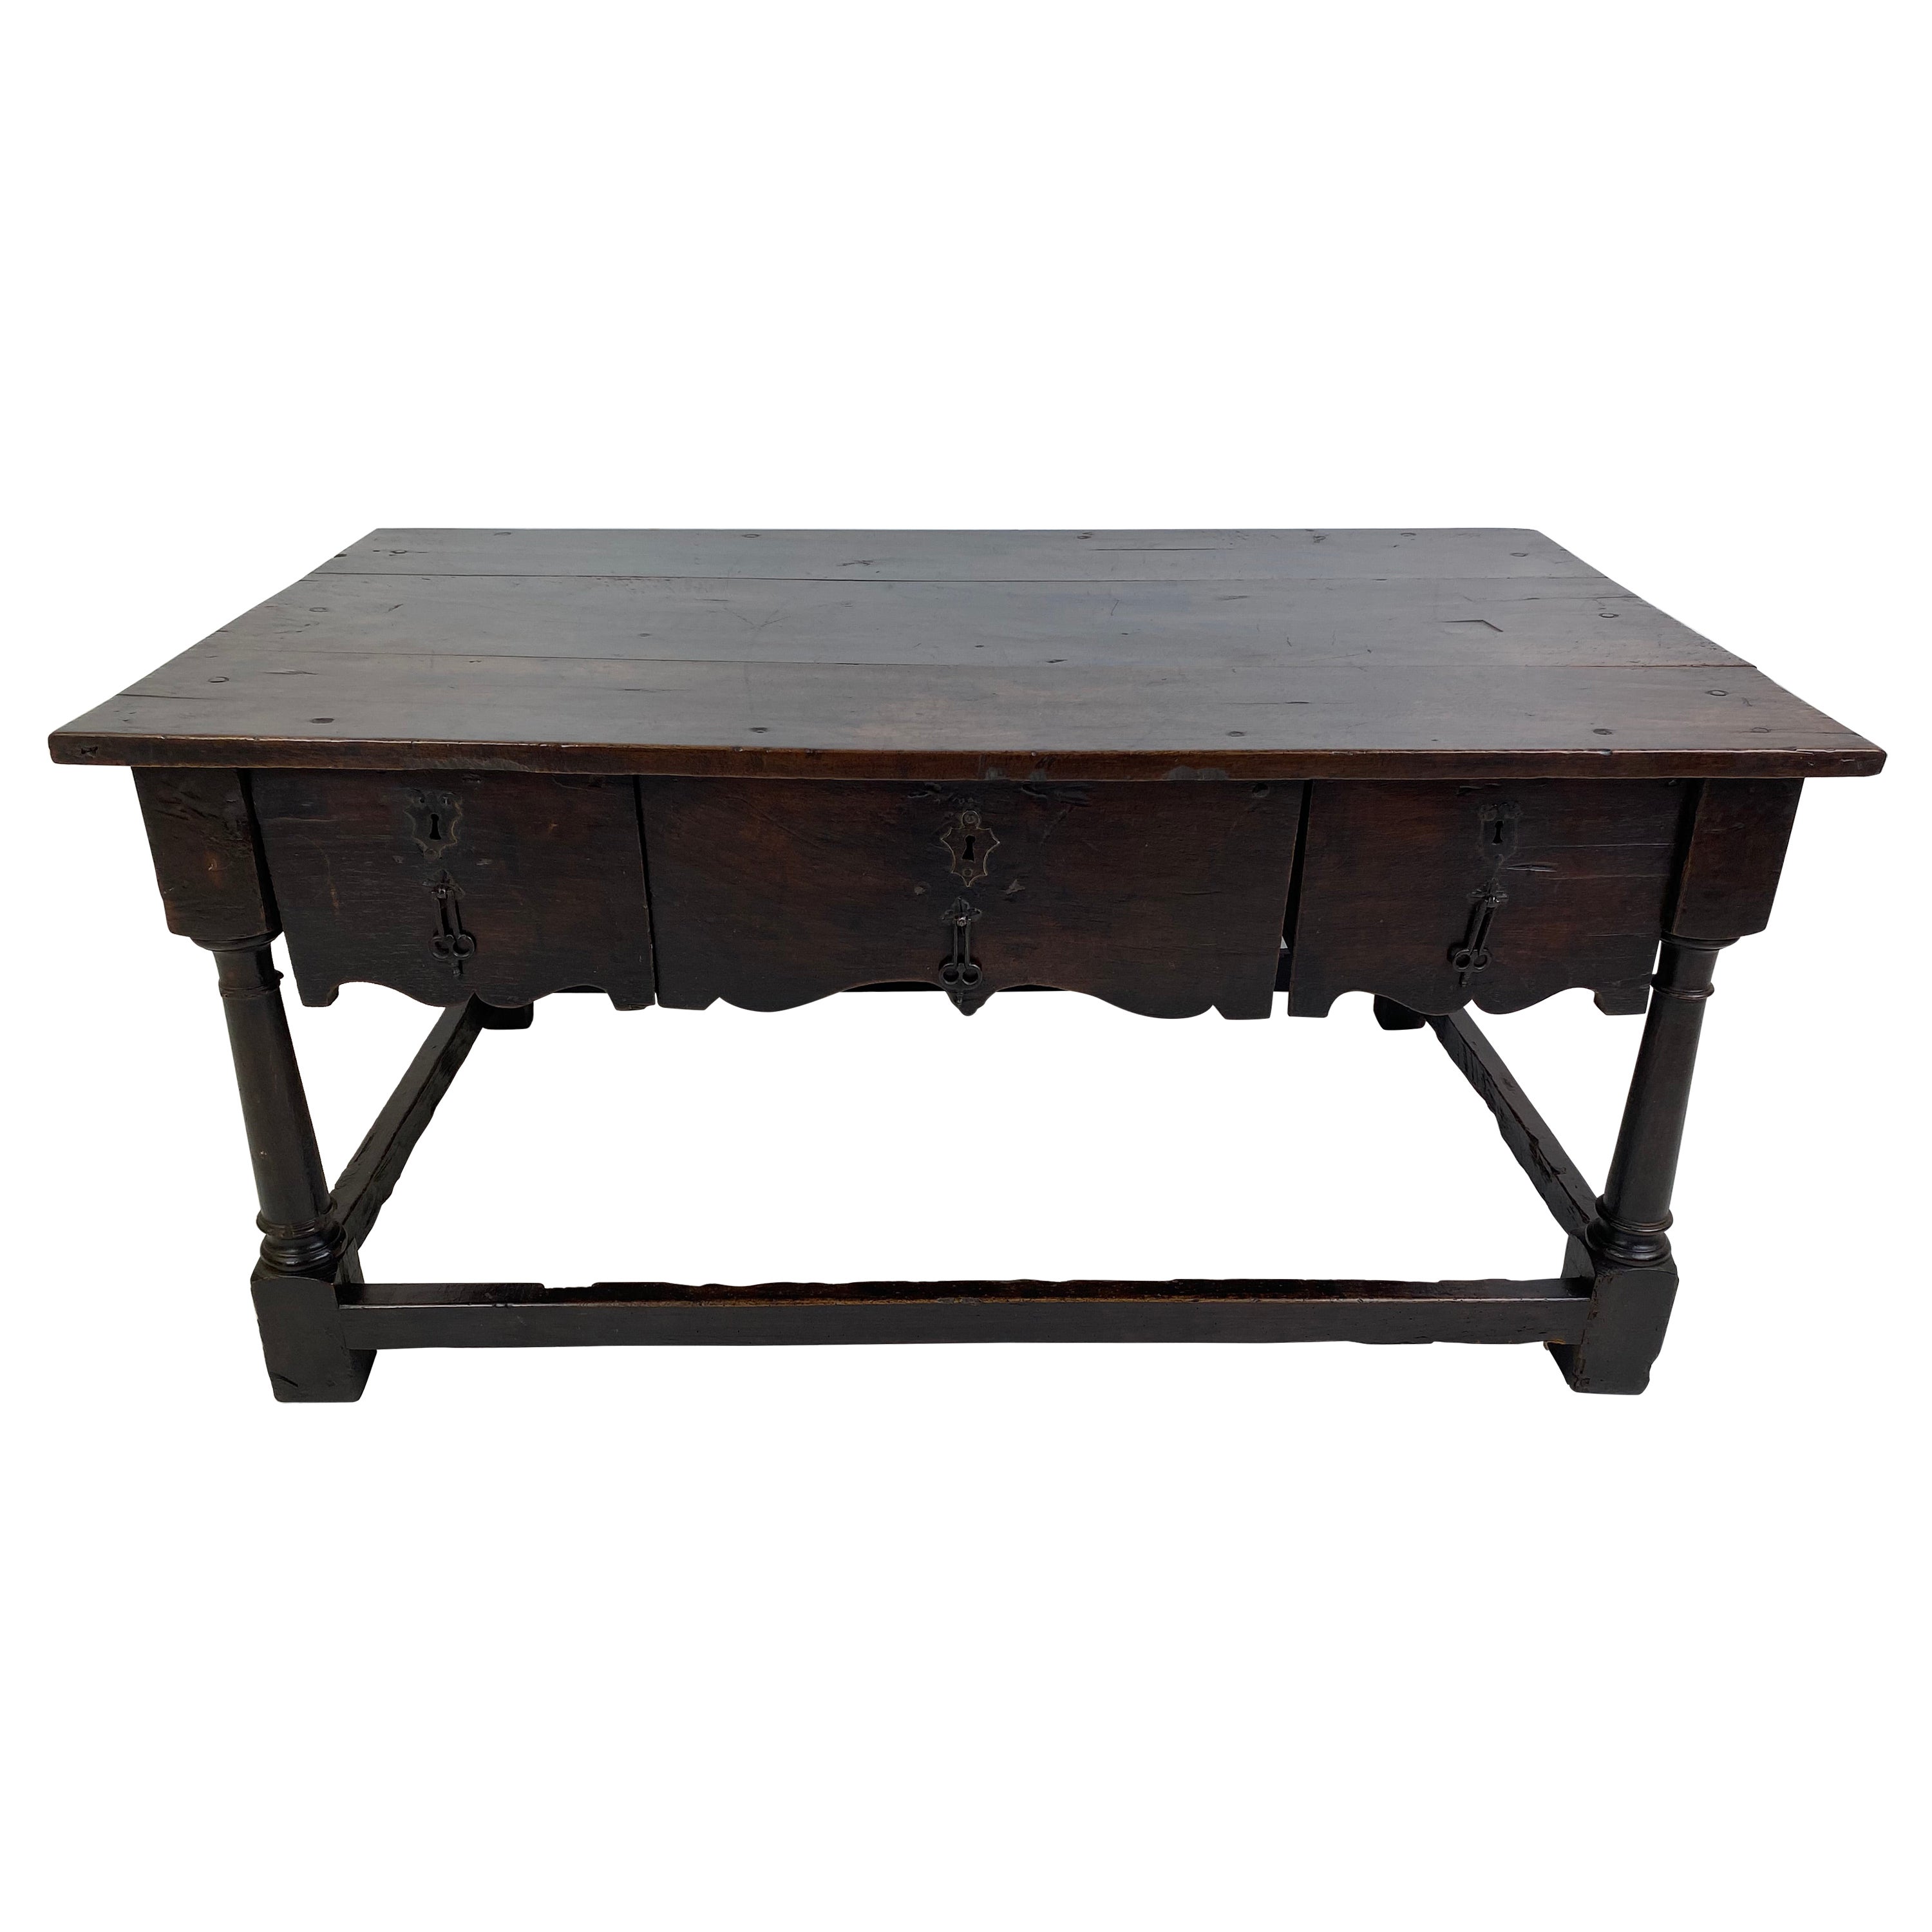 Exceptional Spanish low table with 3 drawers,Walnut,
ideal to put behind a sofa, great good old patina of the wood,
Spain 18th Century.
 